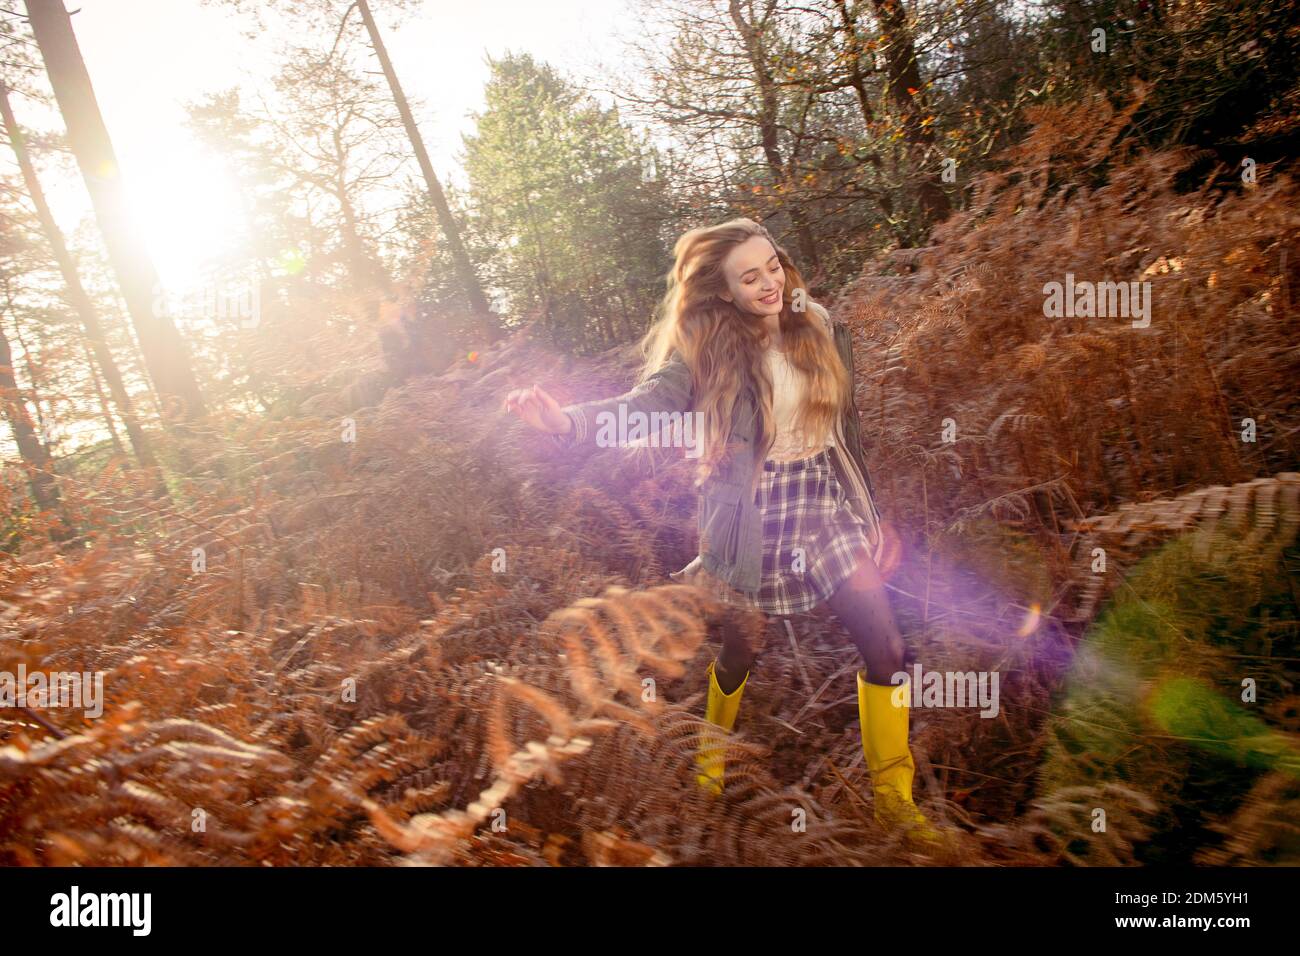 A young naturally beautiful women (age 20) runs through the autumnal ferns having fun in a forest setting with a sense of movement on a sunny day. Stock Photo